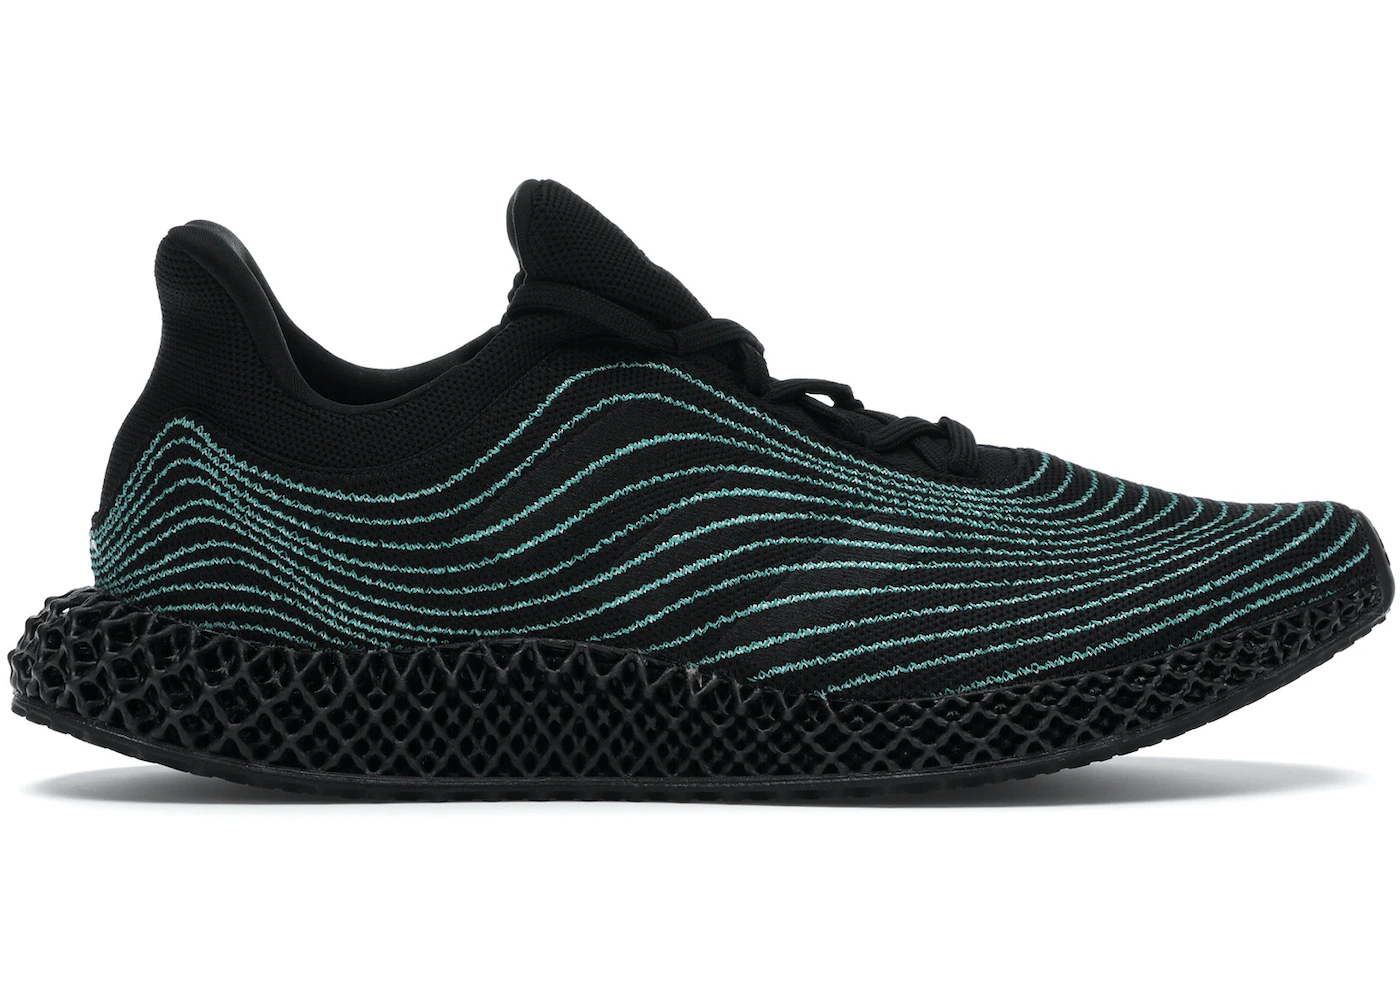 In the name planter Sociable adidas Ultra Boost 4D Uncaged Parley Black - FX2434